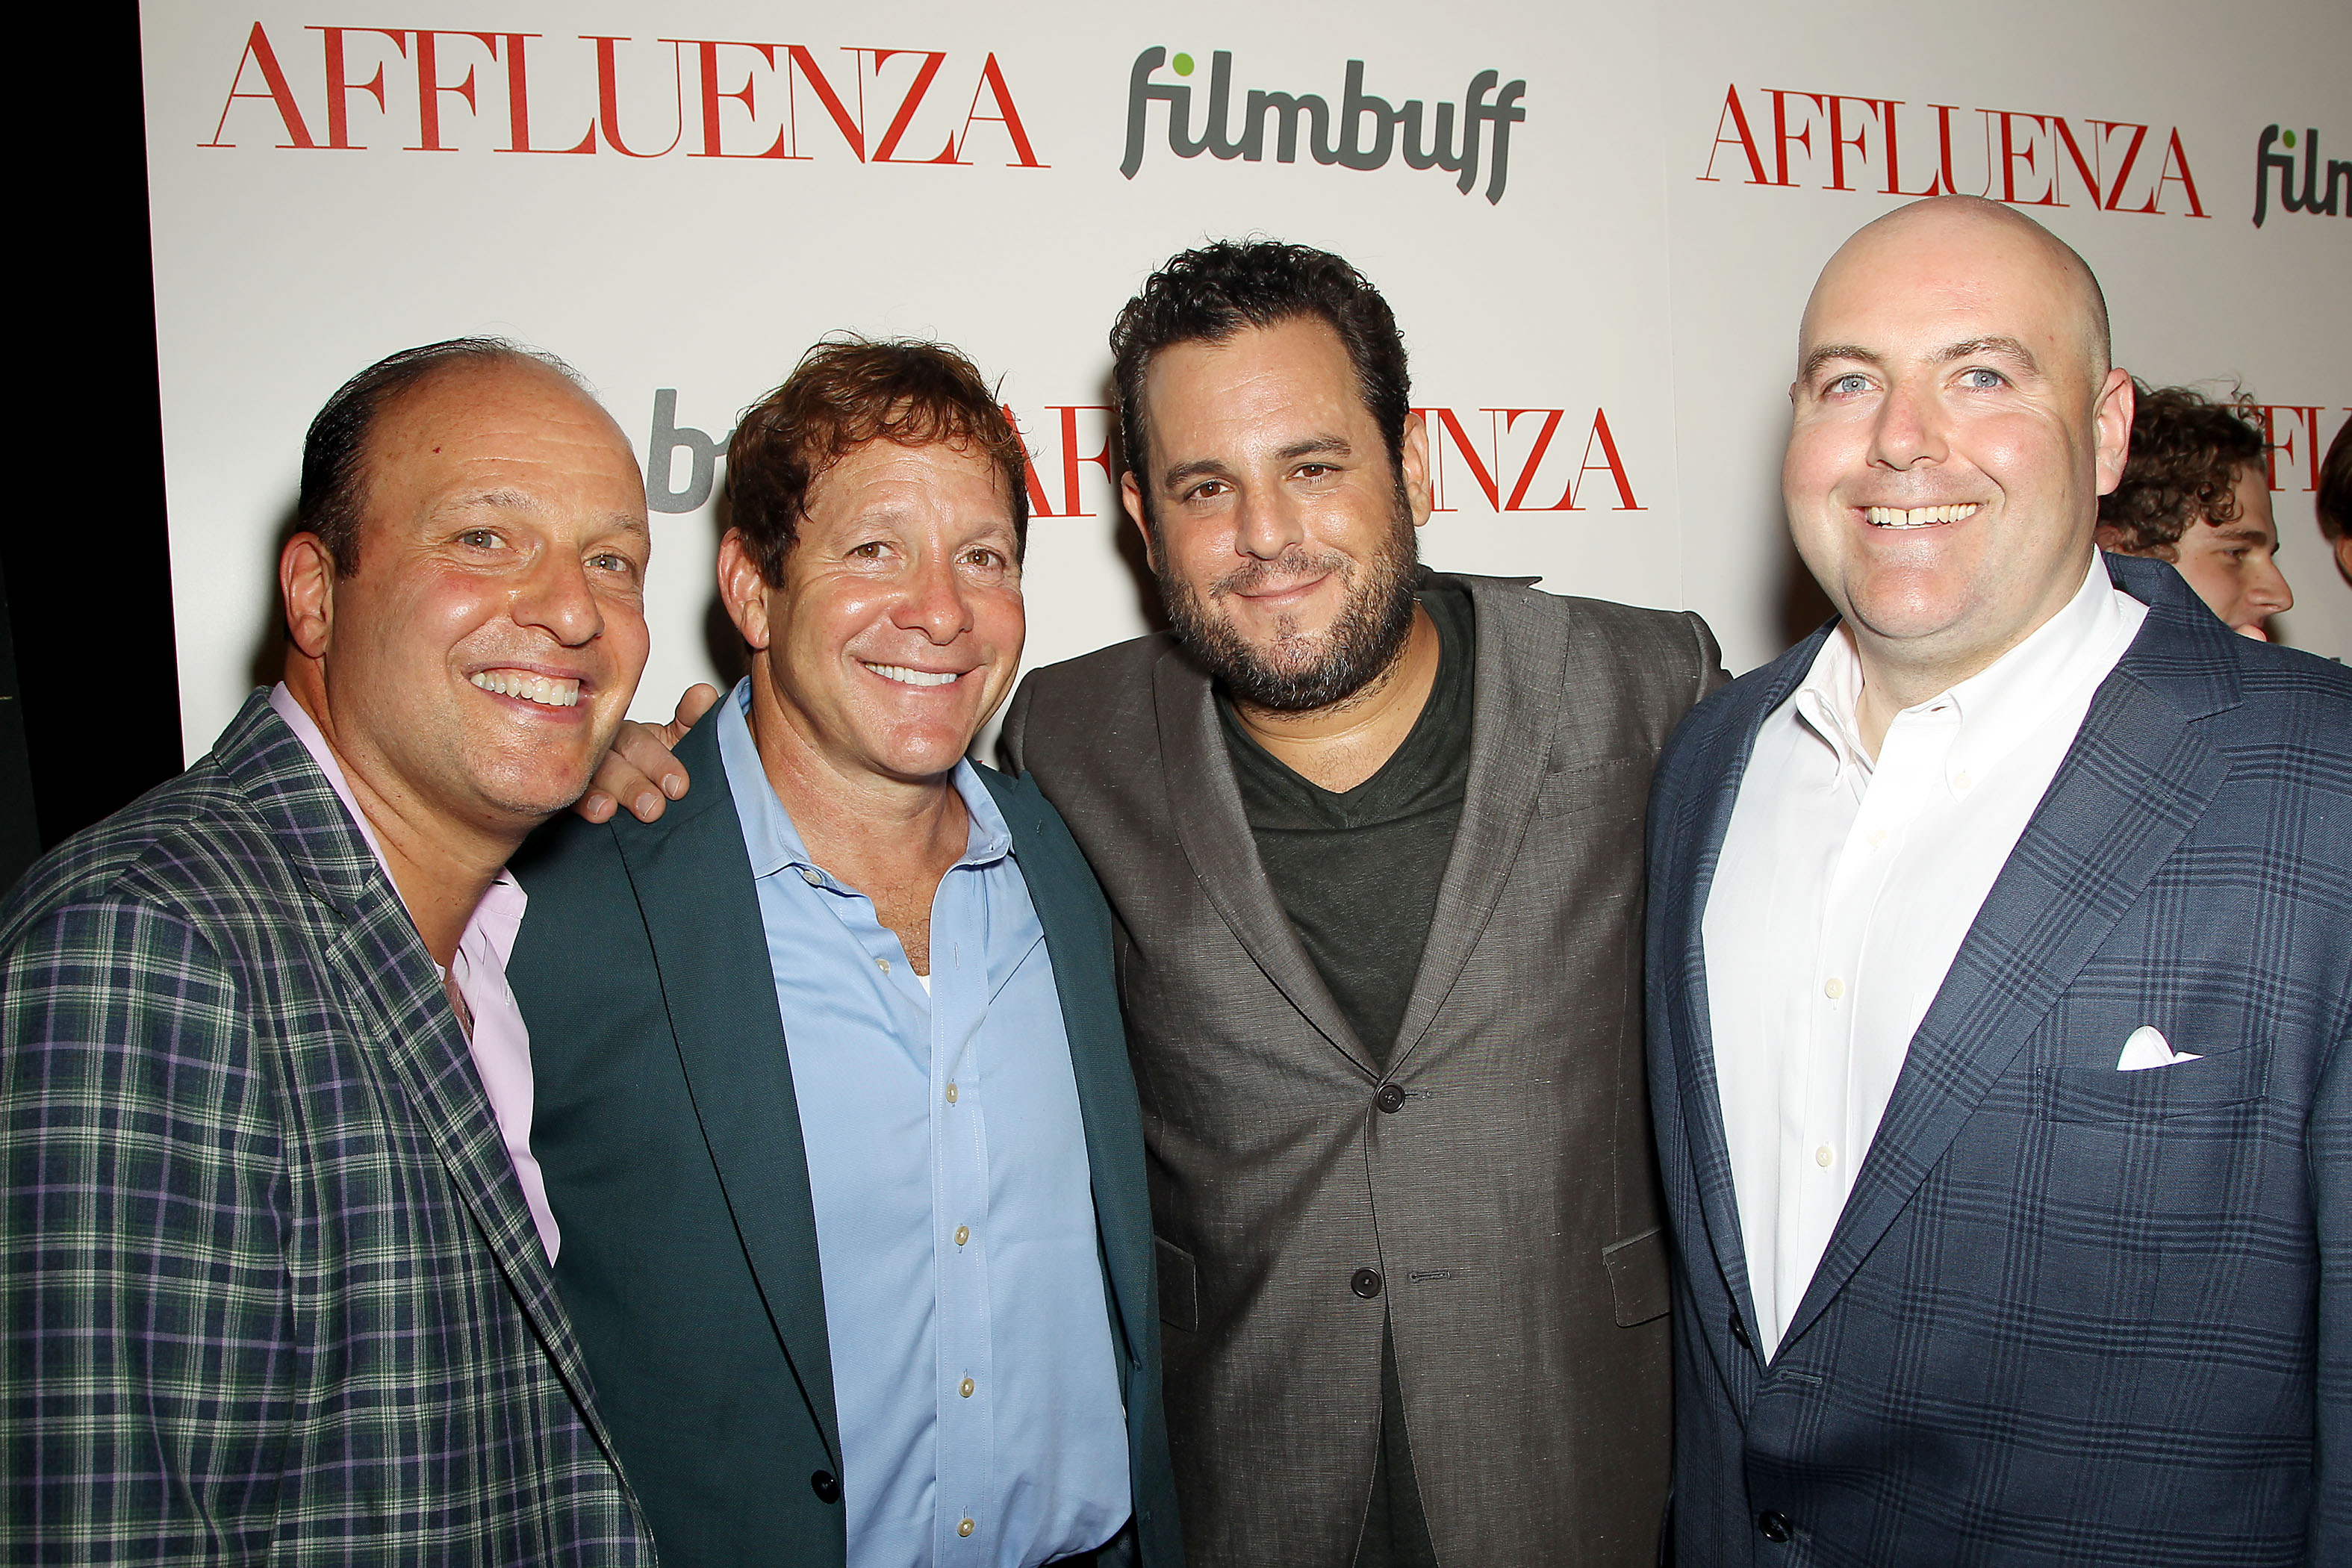 Producer, Morris S. Levy with actor, Steve Guttenberg, director, Kevin Asch, and writer, Antonia Macia at the premiere for Affluenza.